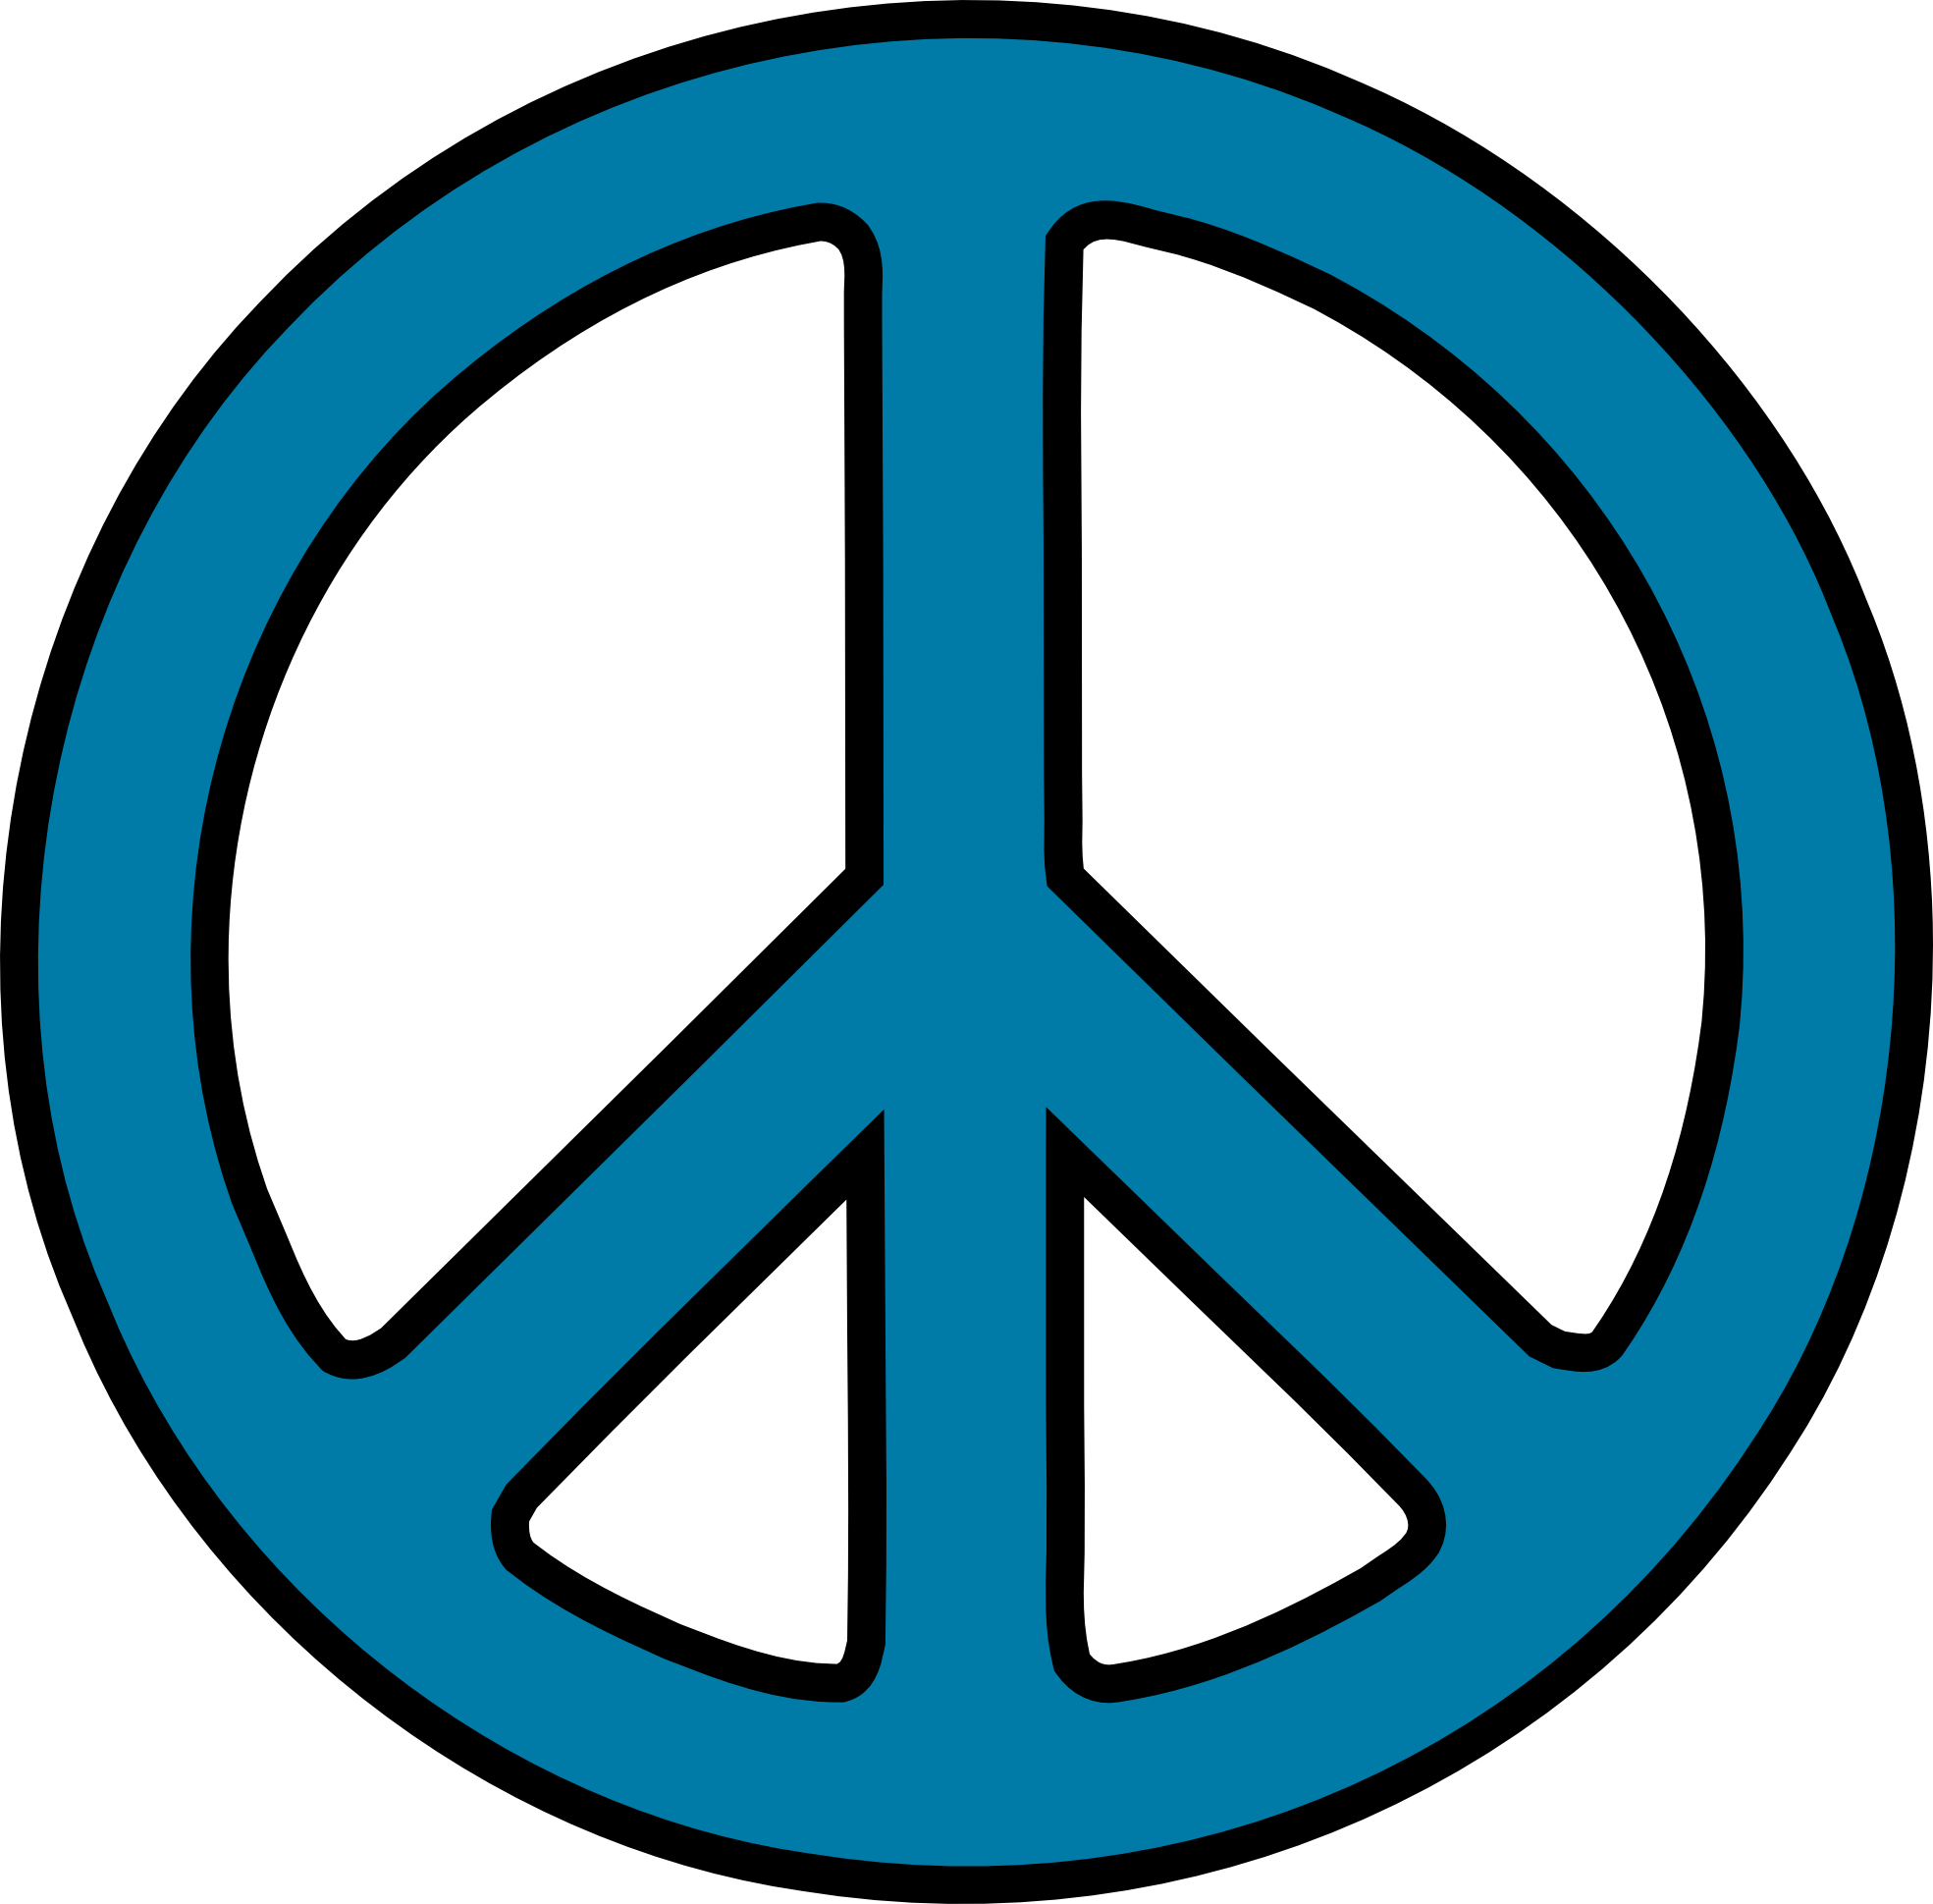 Peace Signs Clip Art in 2019.